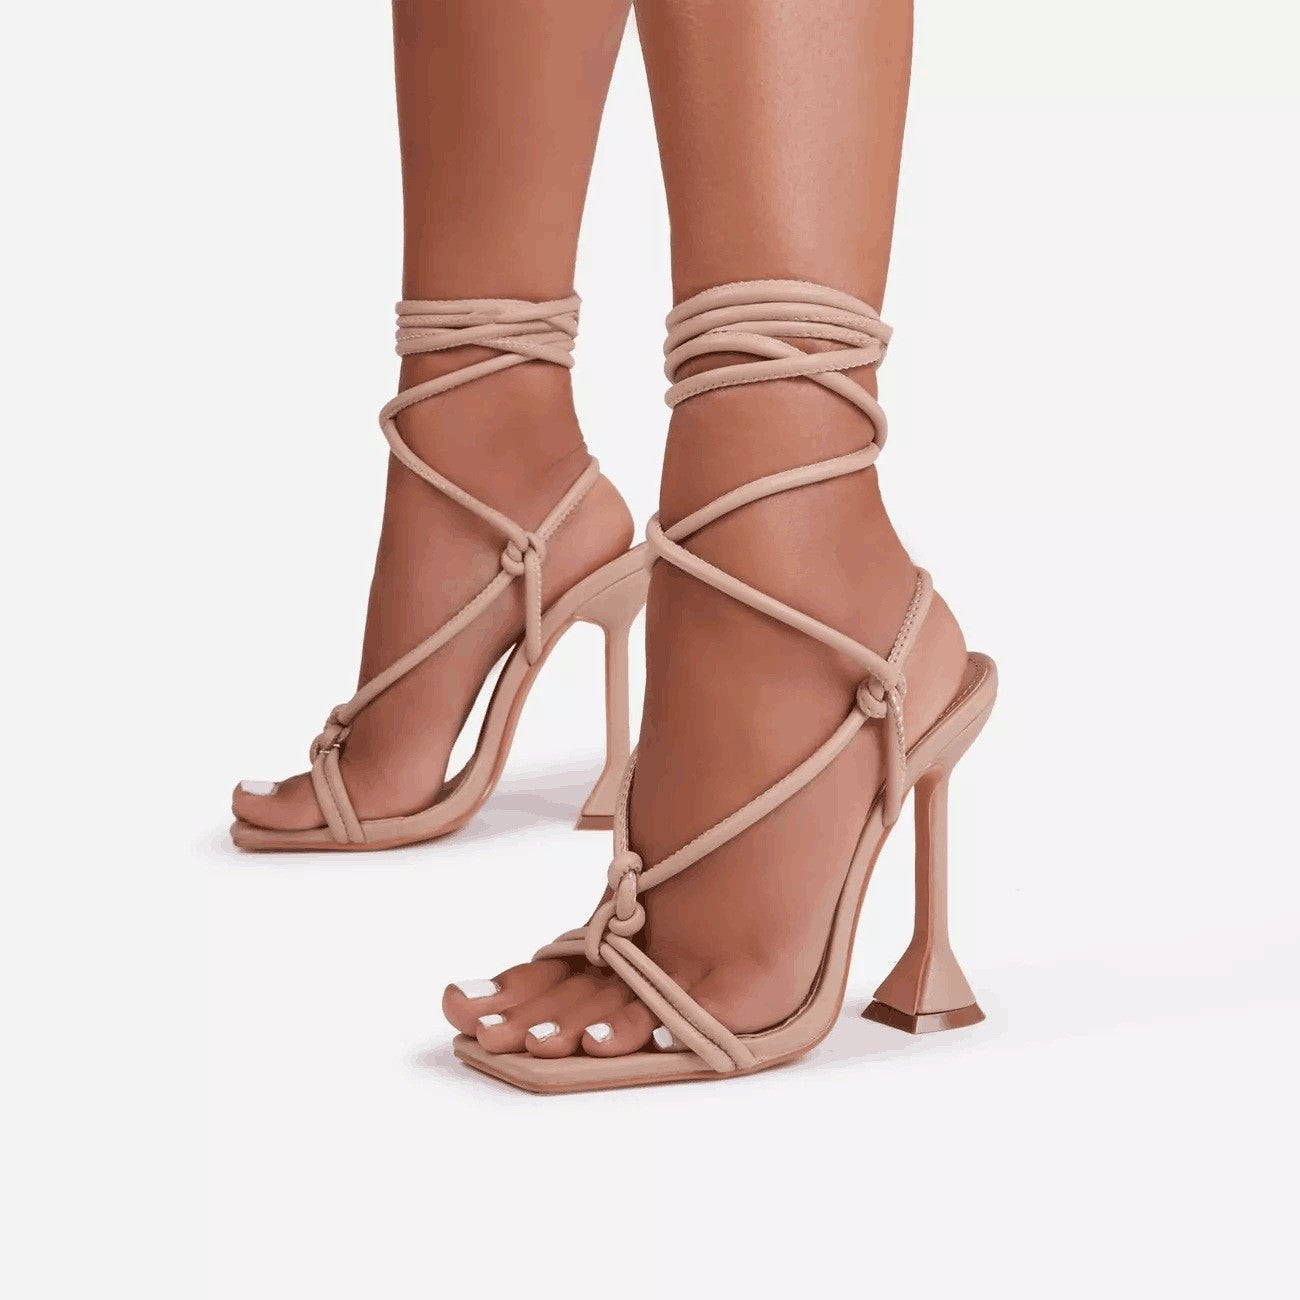 Square Toe Lace-Up Strap High Heels